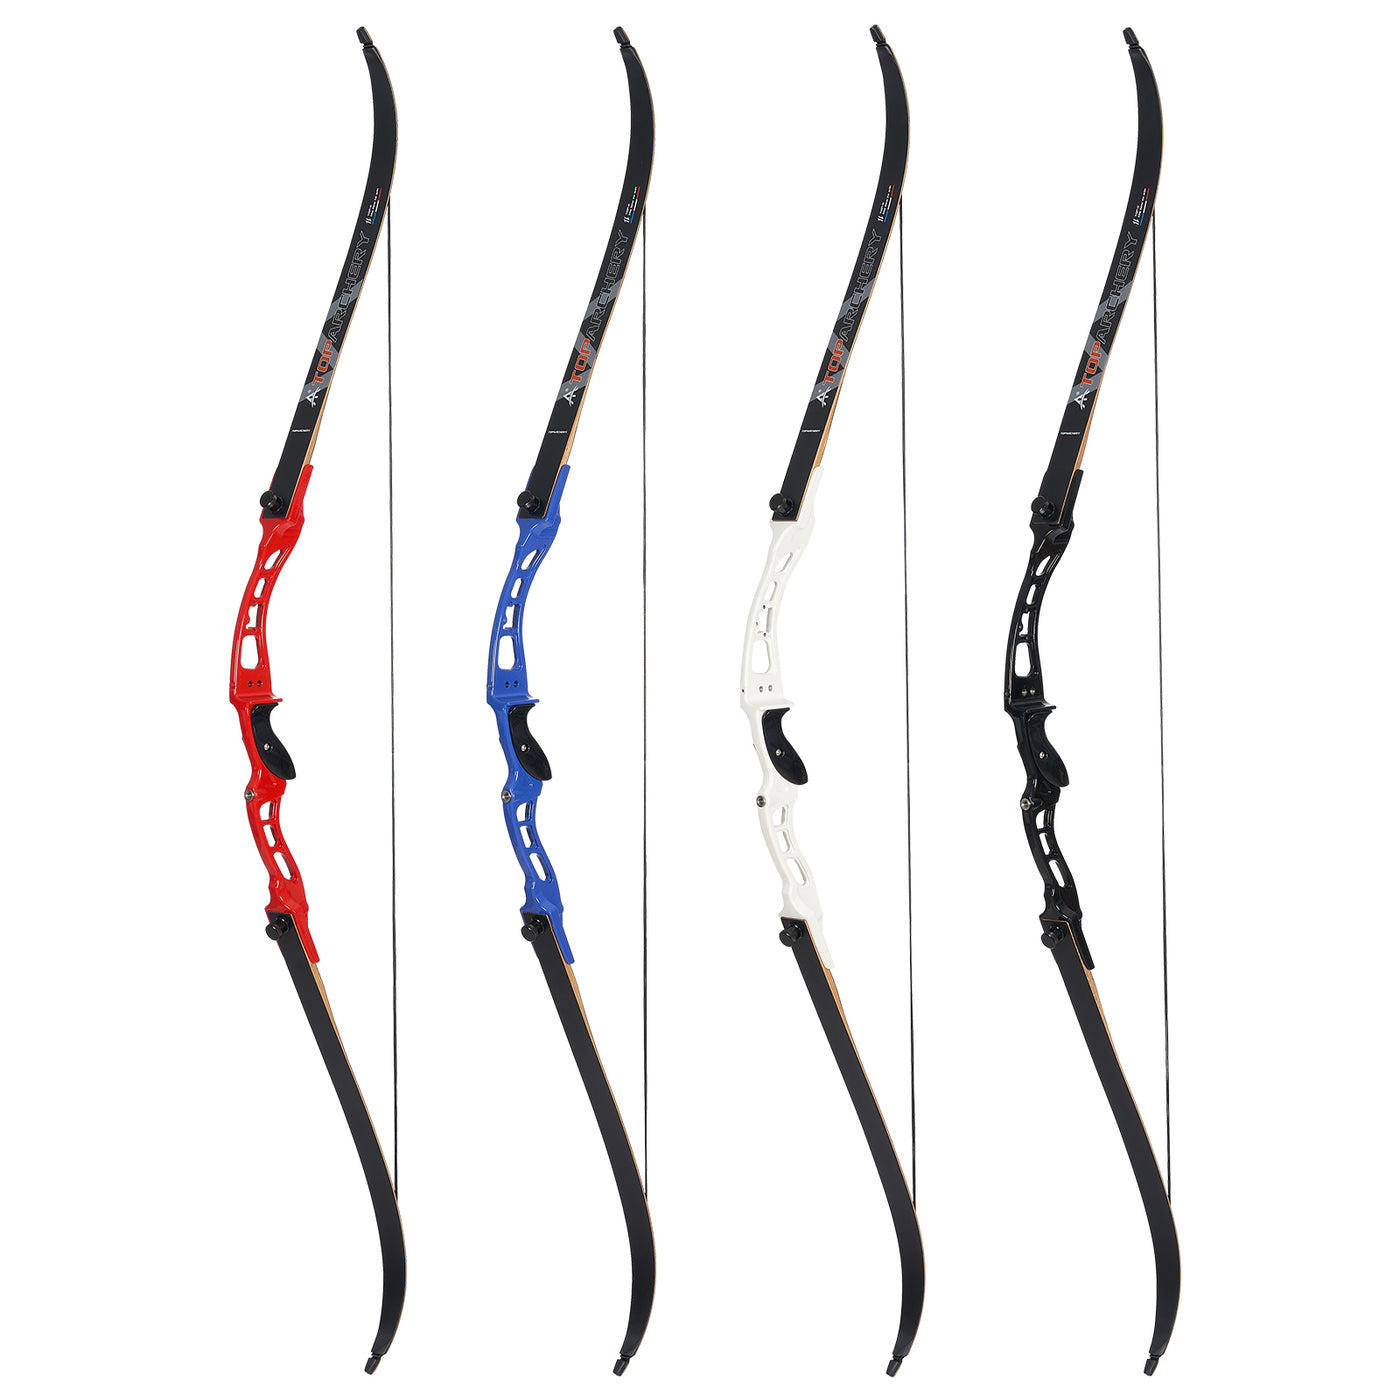 66" 20-40lbs Archery Takedown Recurve RH Bow Competition Training Target Shootig